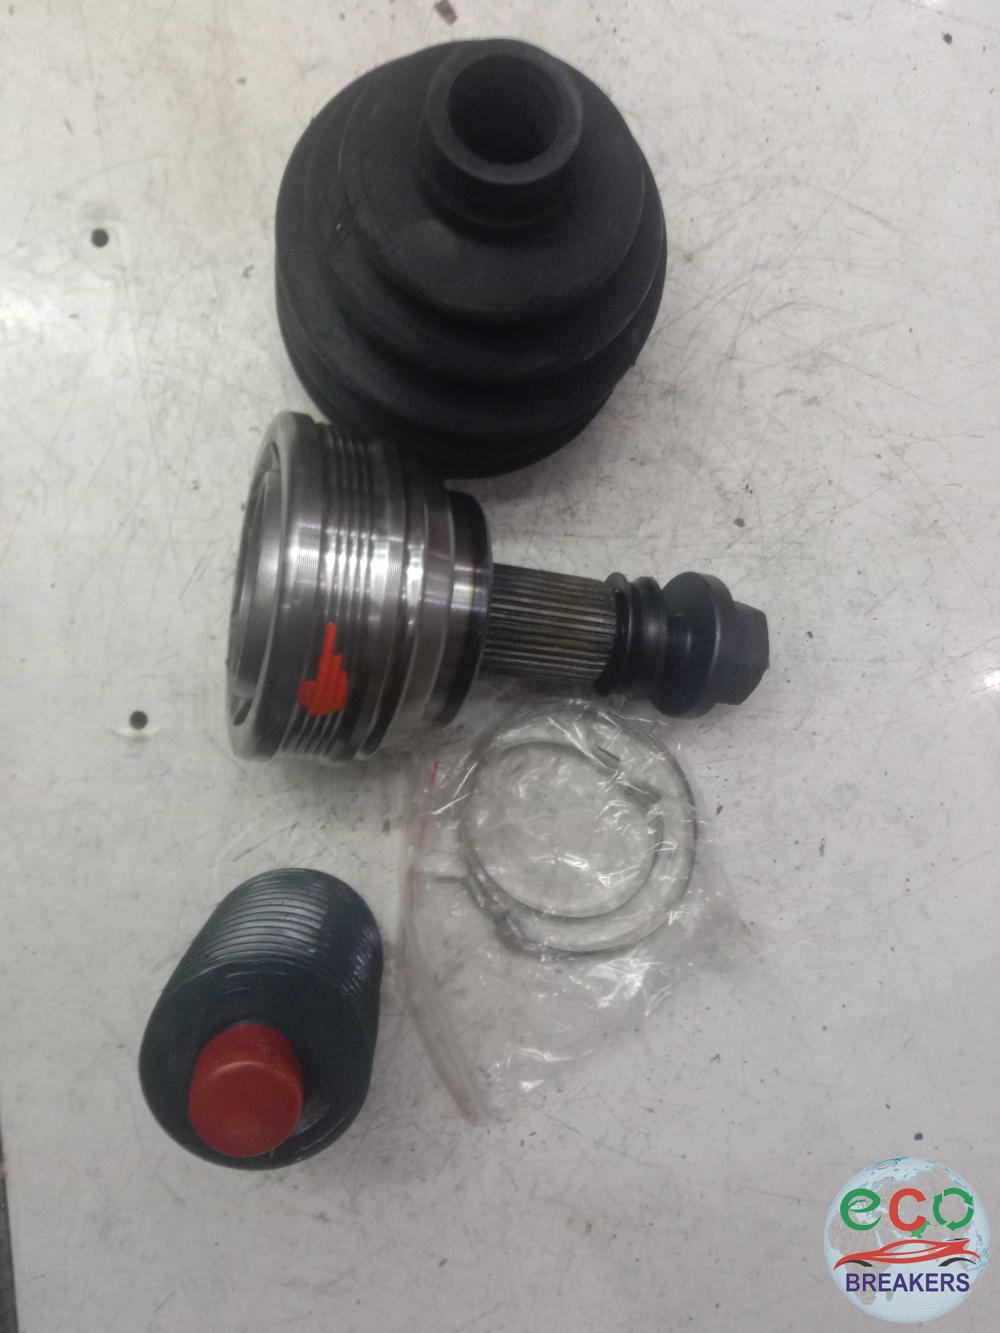 VW Volkswagen Golf MK6 5K1 A6 59 Reg S 79bph 1KZAW07 Cv Joint Outer RIGHT DRIVER OFF SIDE FRONT OSF 1.4 i 1390 cc Petrol CGGA 5 Speed Manual 5 Door Hatchback